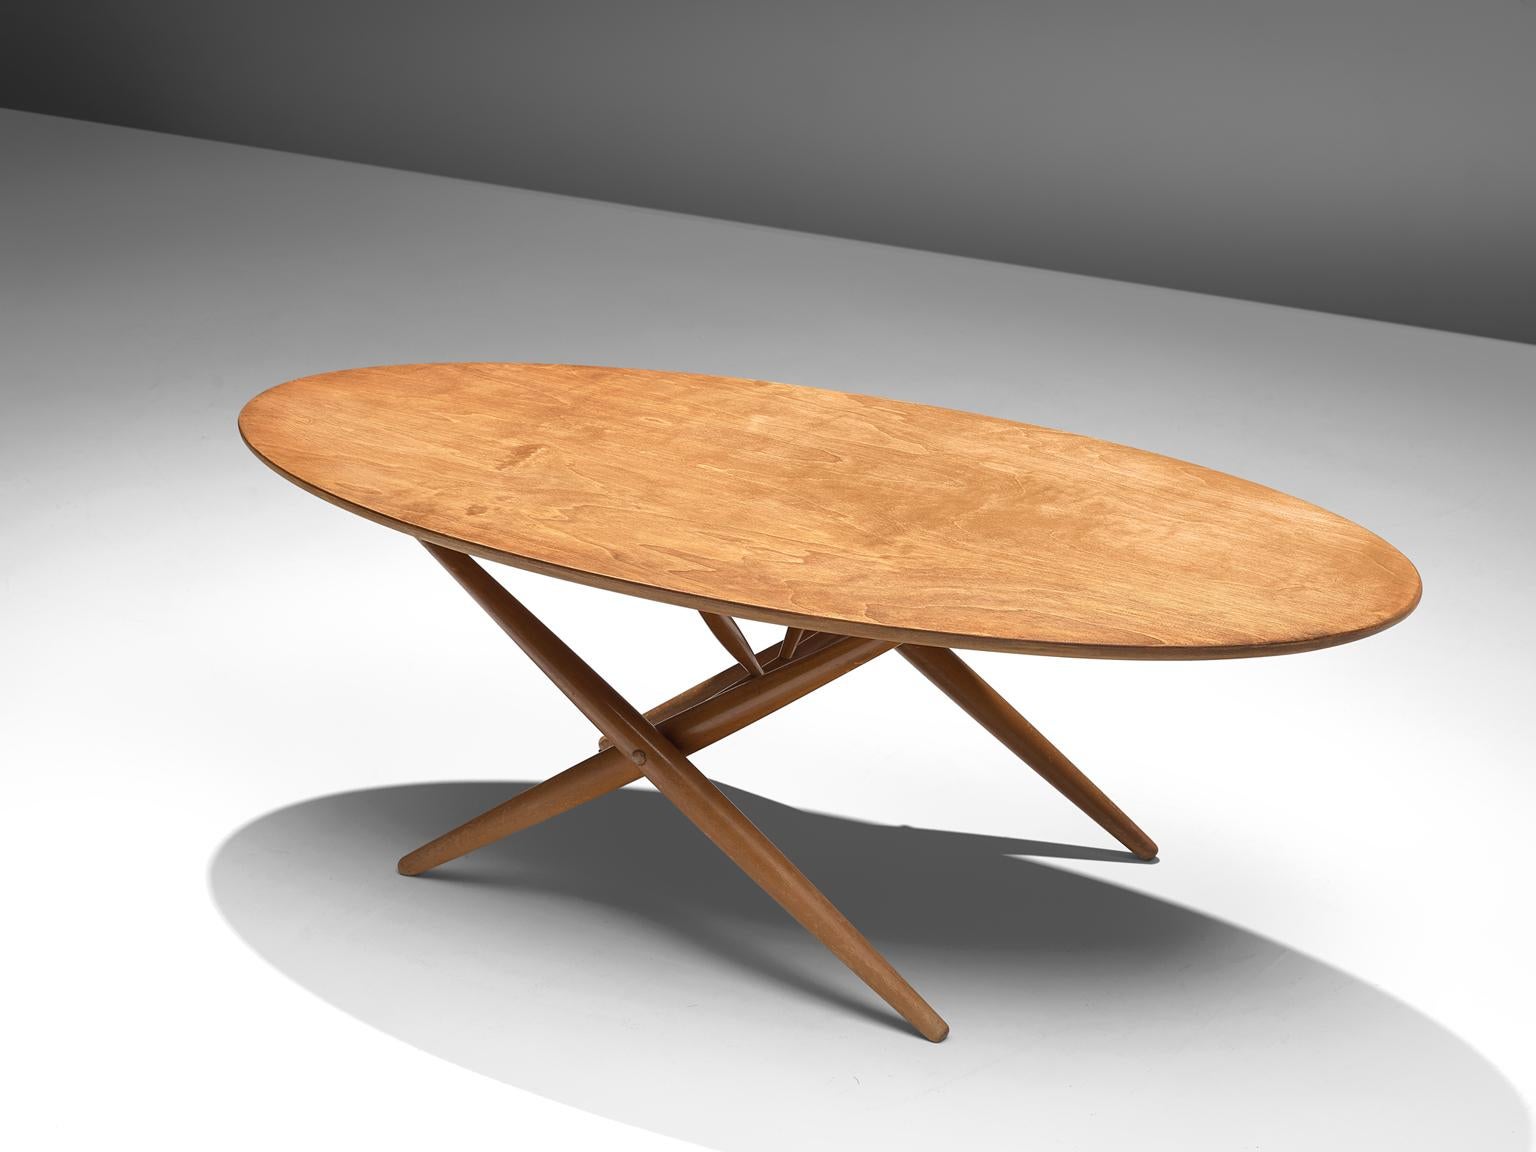 Ilmari Tapiovaara, coffee table, beech, Finland, 1960s.

Oval cocktail table in beech, designed by Ilmari Tapiovaara. The base consists of several X-shapes or crossed lines. Great graphical expression is created with these lines. The base is